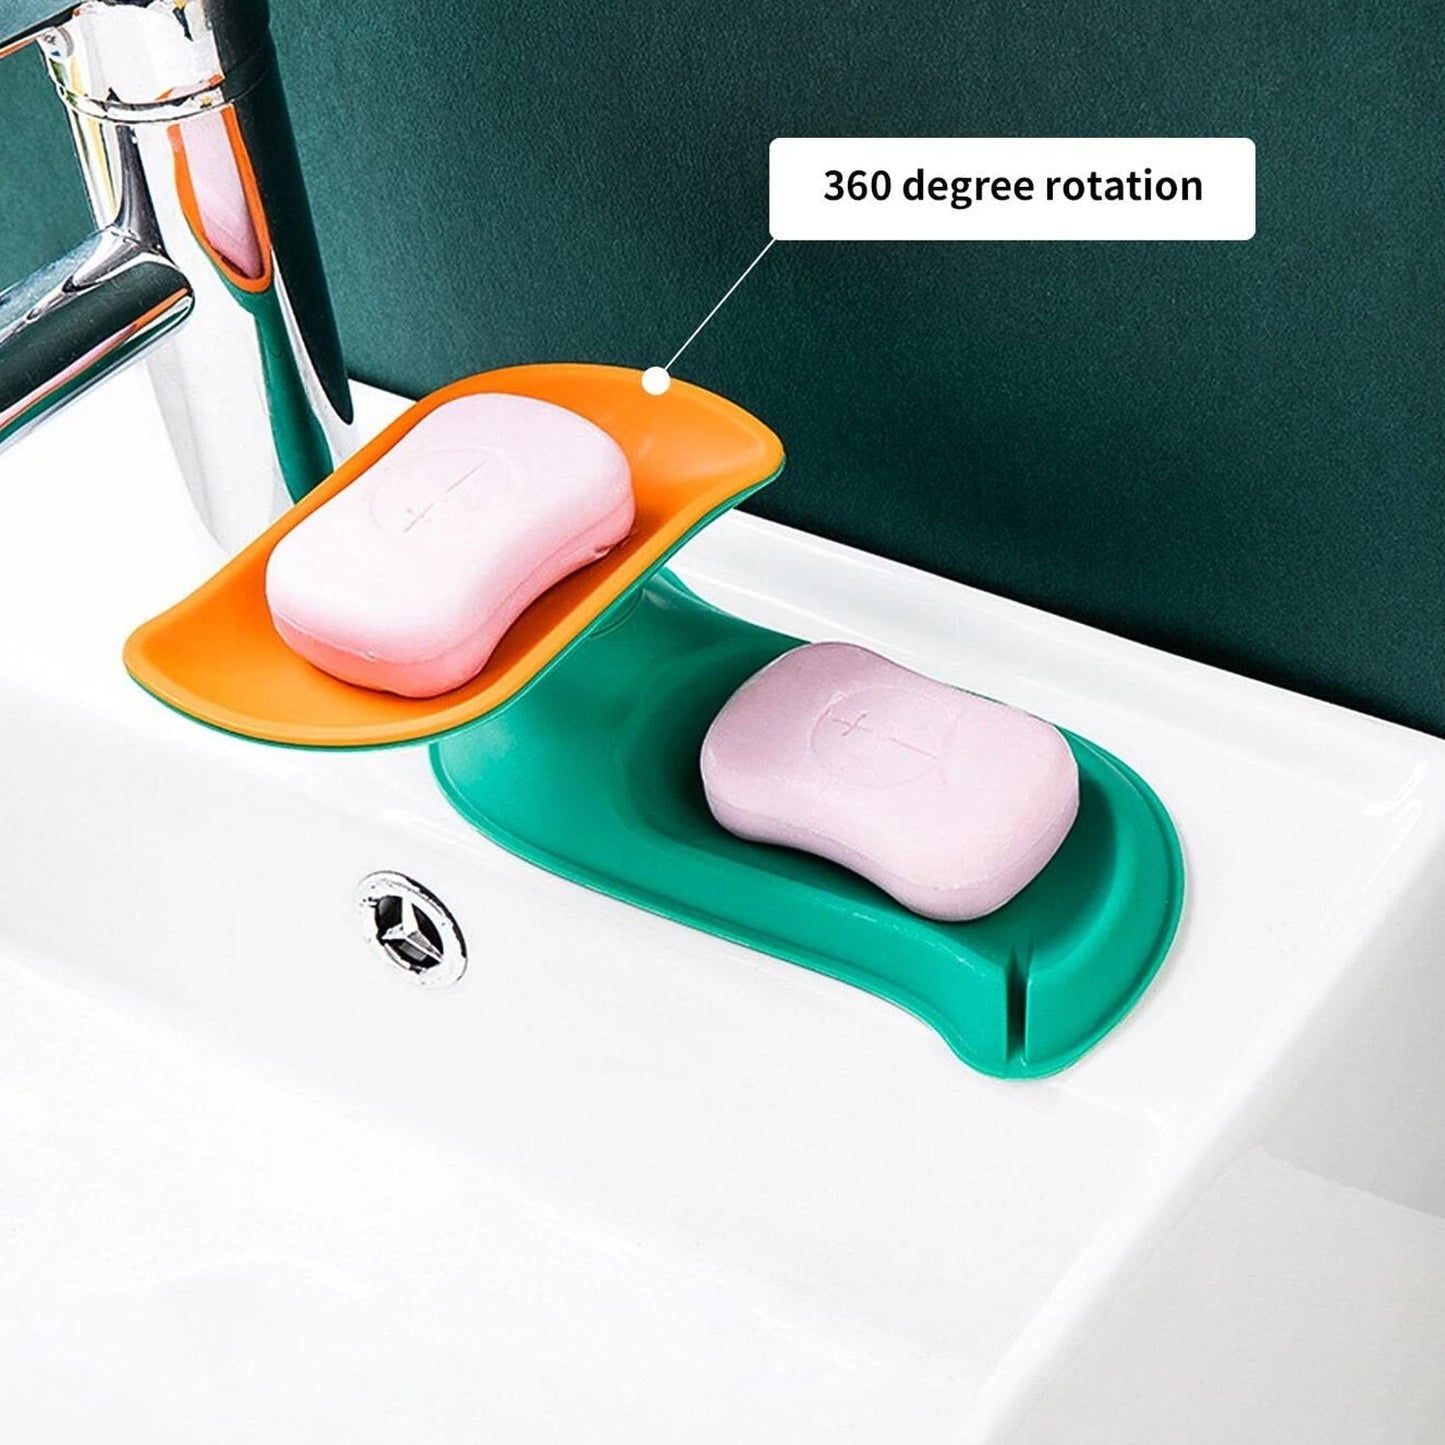 4858C Plastic Double Layer Soap Dish Holder| Decorative Storage Holder Box for Bathroom, Kitchen, Easy Cleaning ,Soap Saver. DeoDap